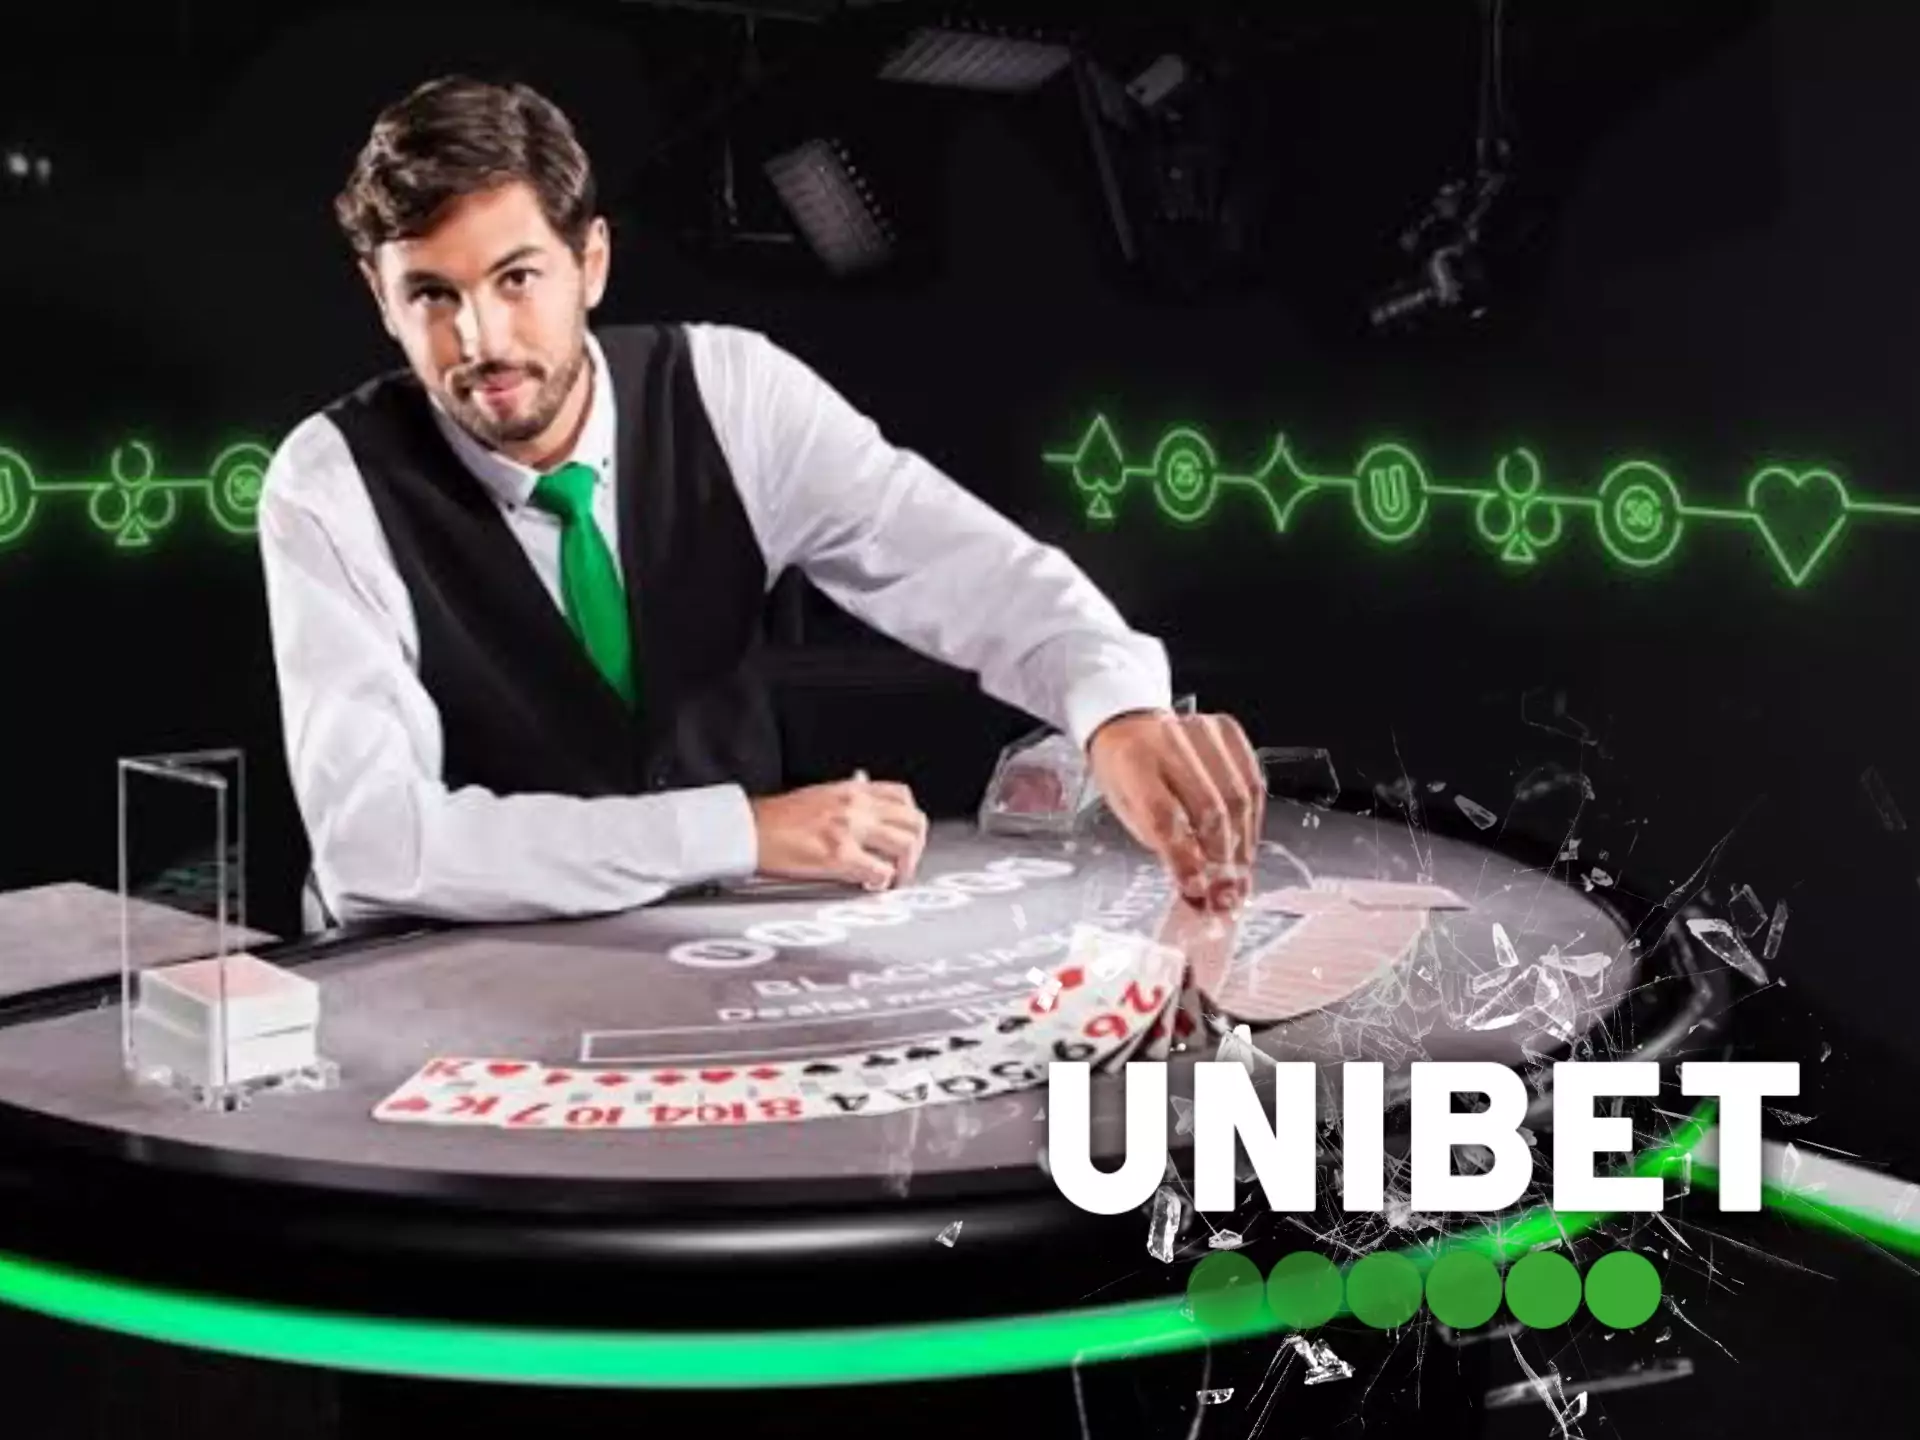 Try to win a real dealer at Unibet live casino.